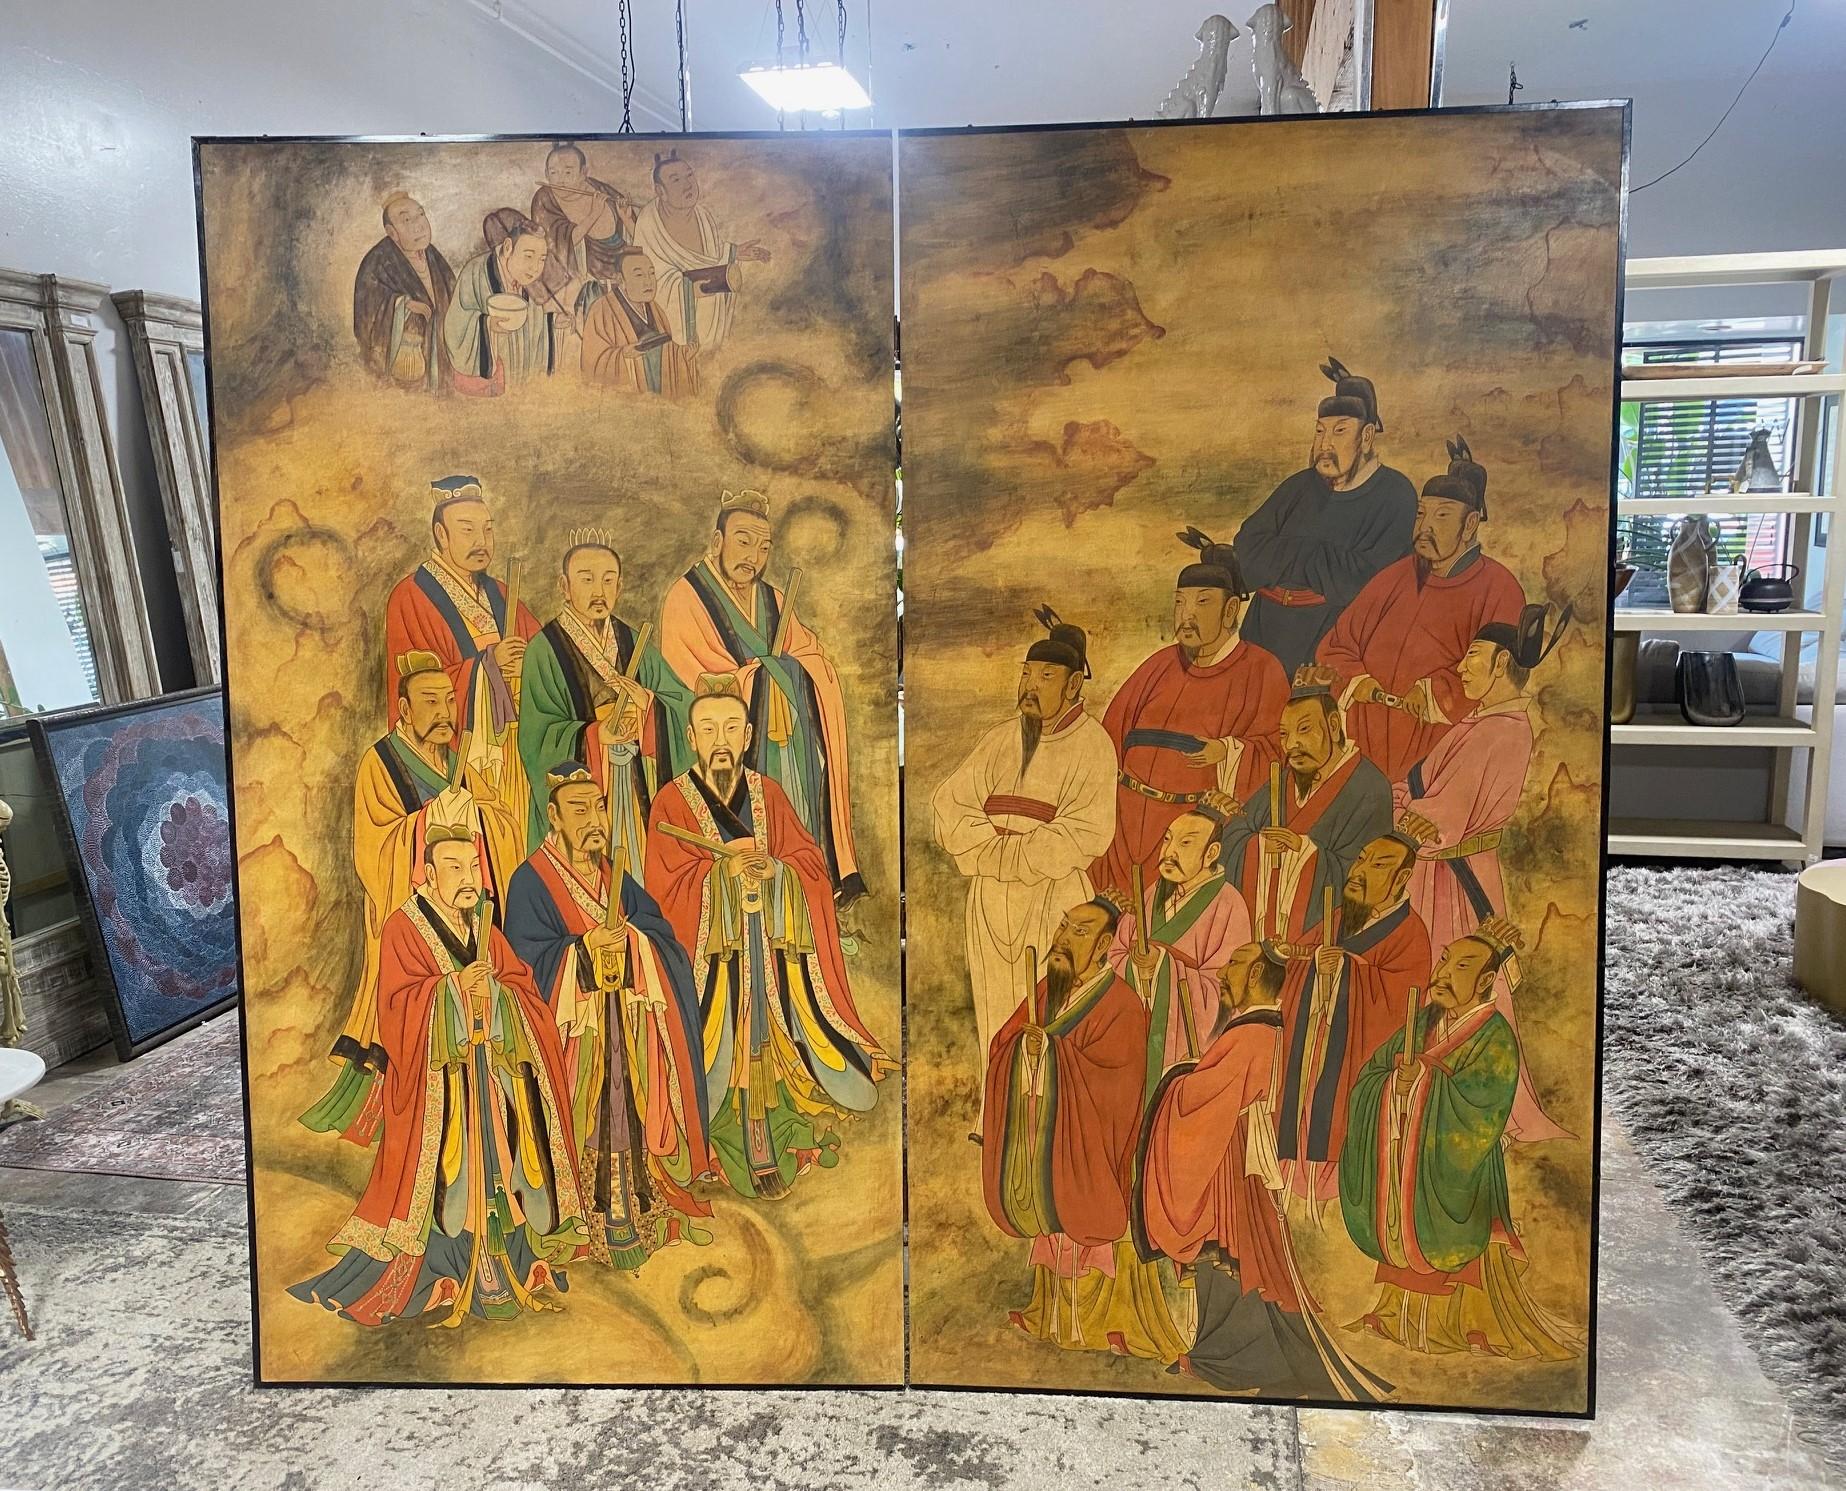 A gorgeous, quite large, boldly colored, and alluring hand-painted two-panel Chinese/Japanese/Asian Byobu folding screen depicting 18 exquisitely clad male ancestral or immortal figures and a group of four other what appears to be heavenly figures